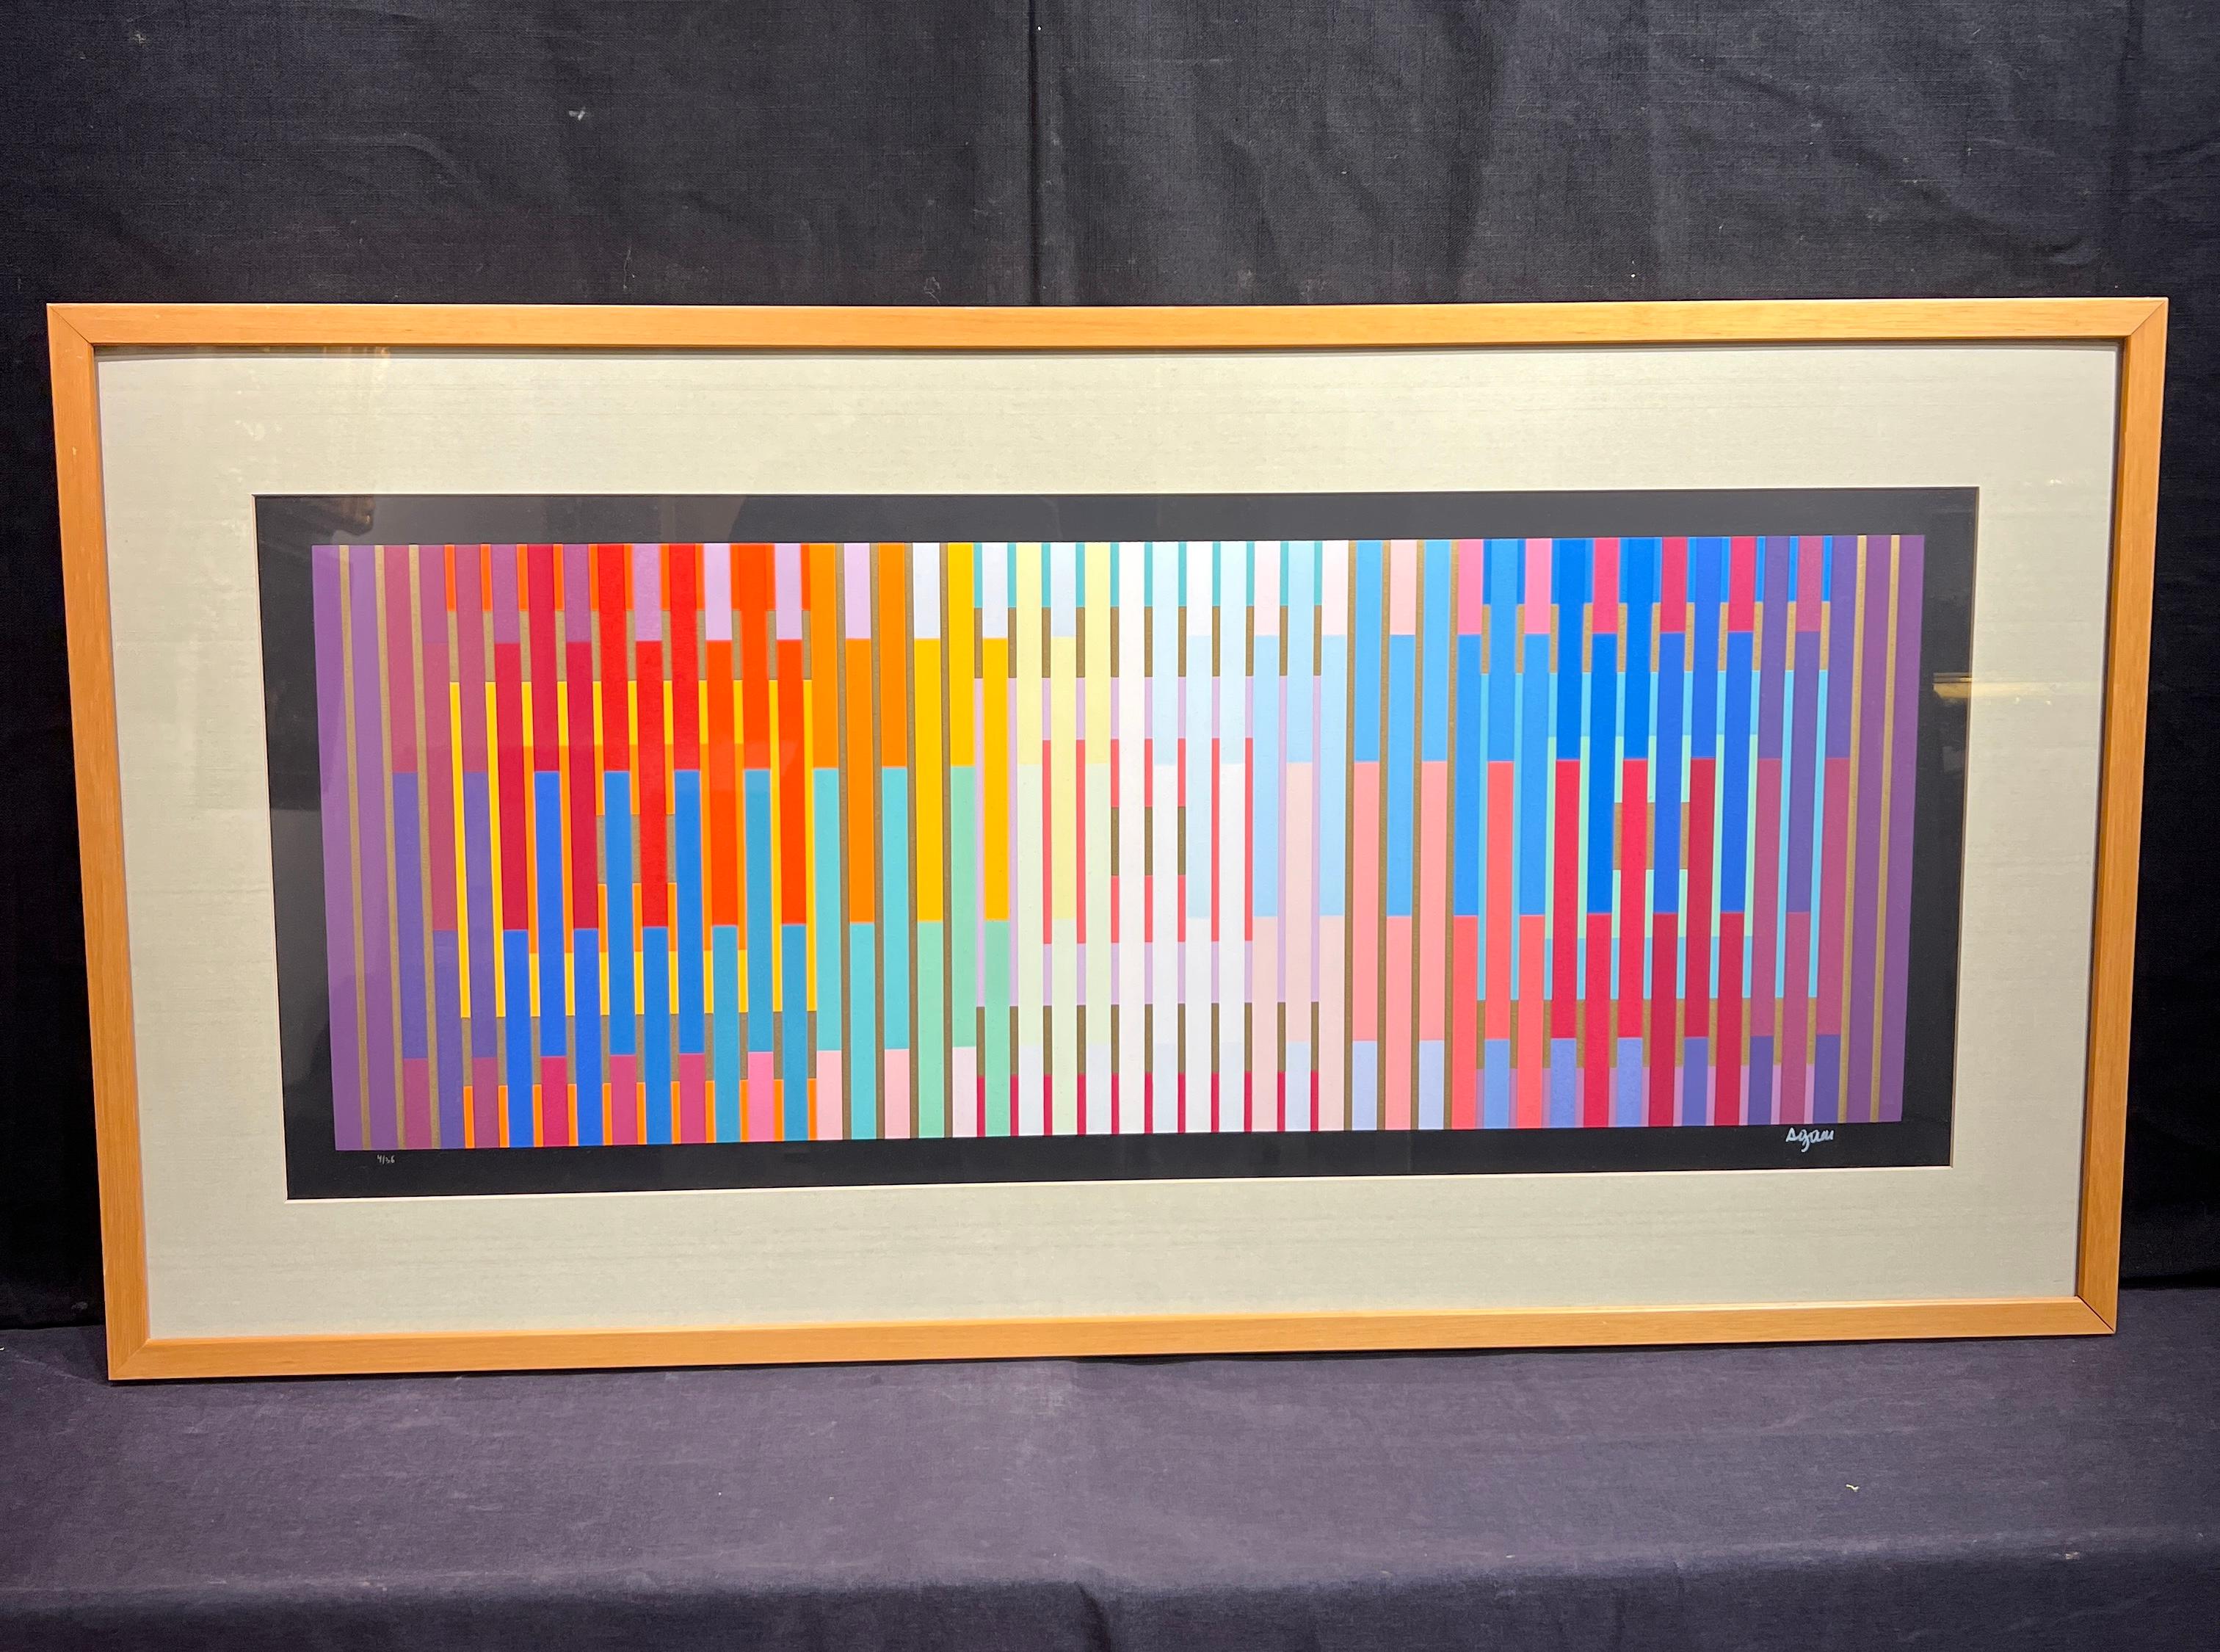 Abstract Purple, Blue, Greens (Serigraph)
By Yaacov Agam (Israeli, b. 1928)
Signed Lower Right
Edition 4/30 Lower Left
Unframed: 14